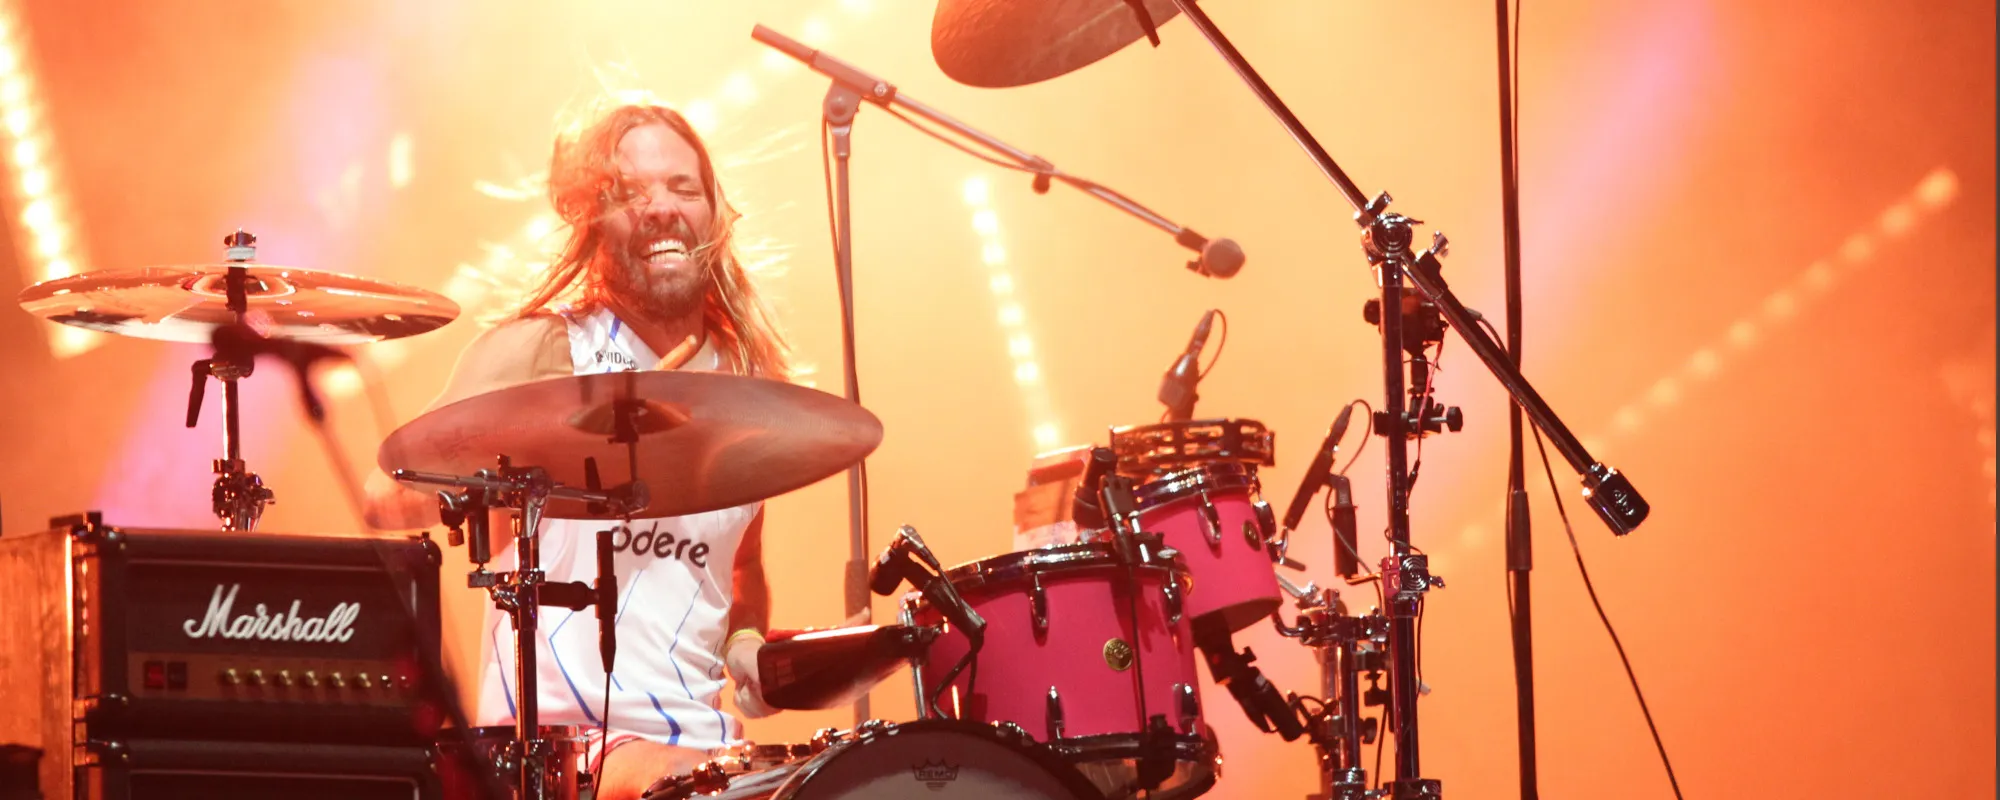 Full Lineups Revealed for Taylor Hawkins Tribute Concerts, Paramount to Live Stream Wembley Stadium Show